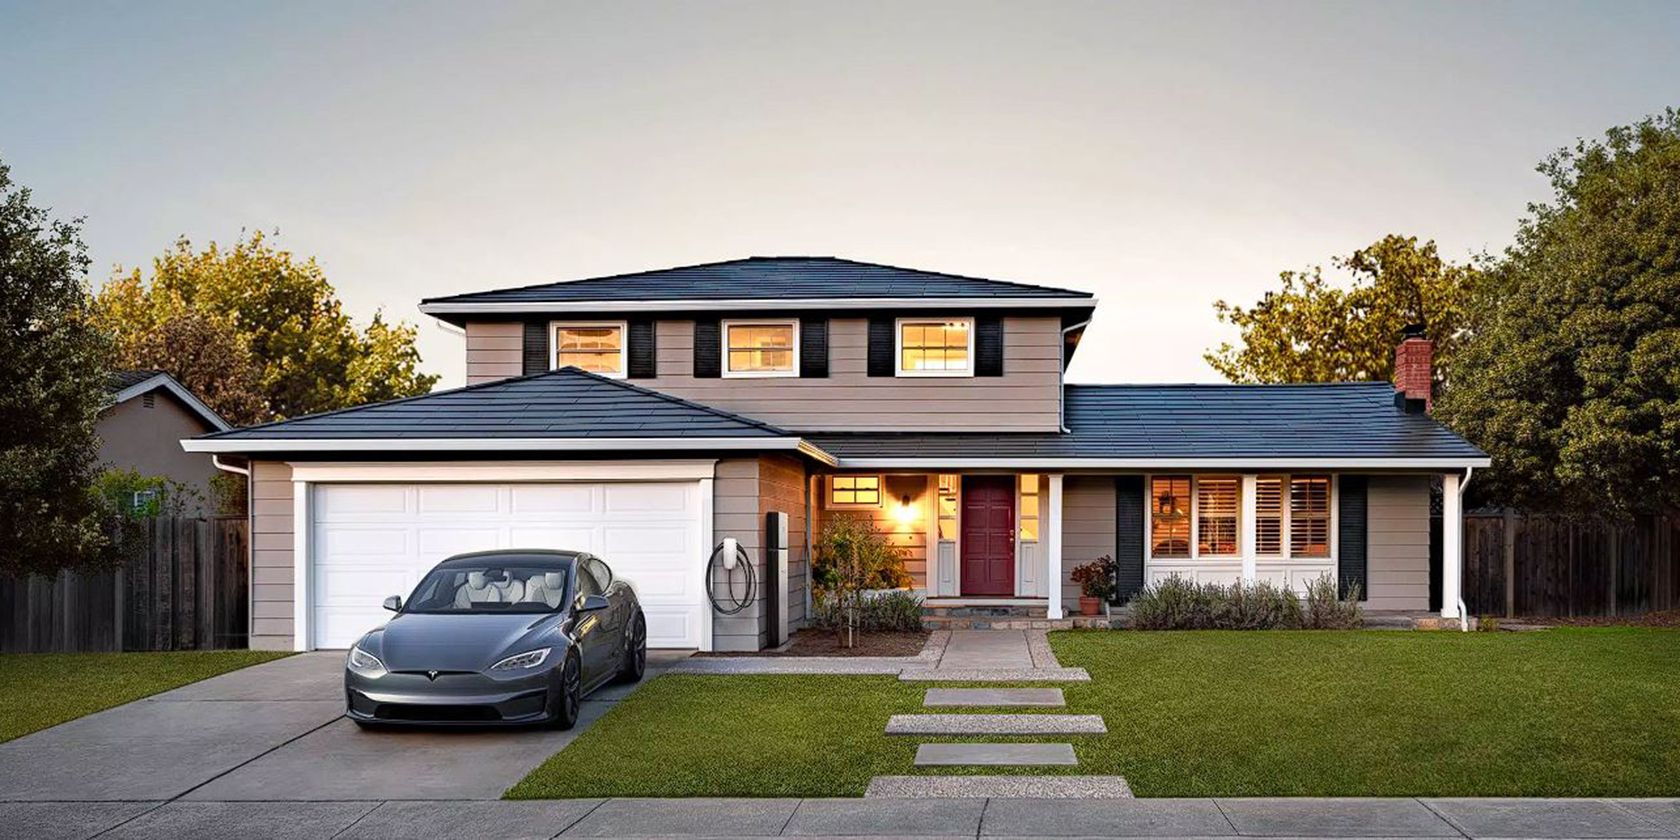 tesla solar roof completed installation image